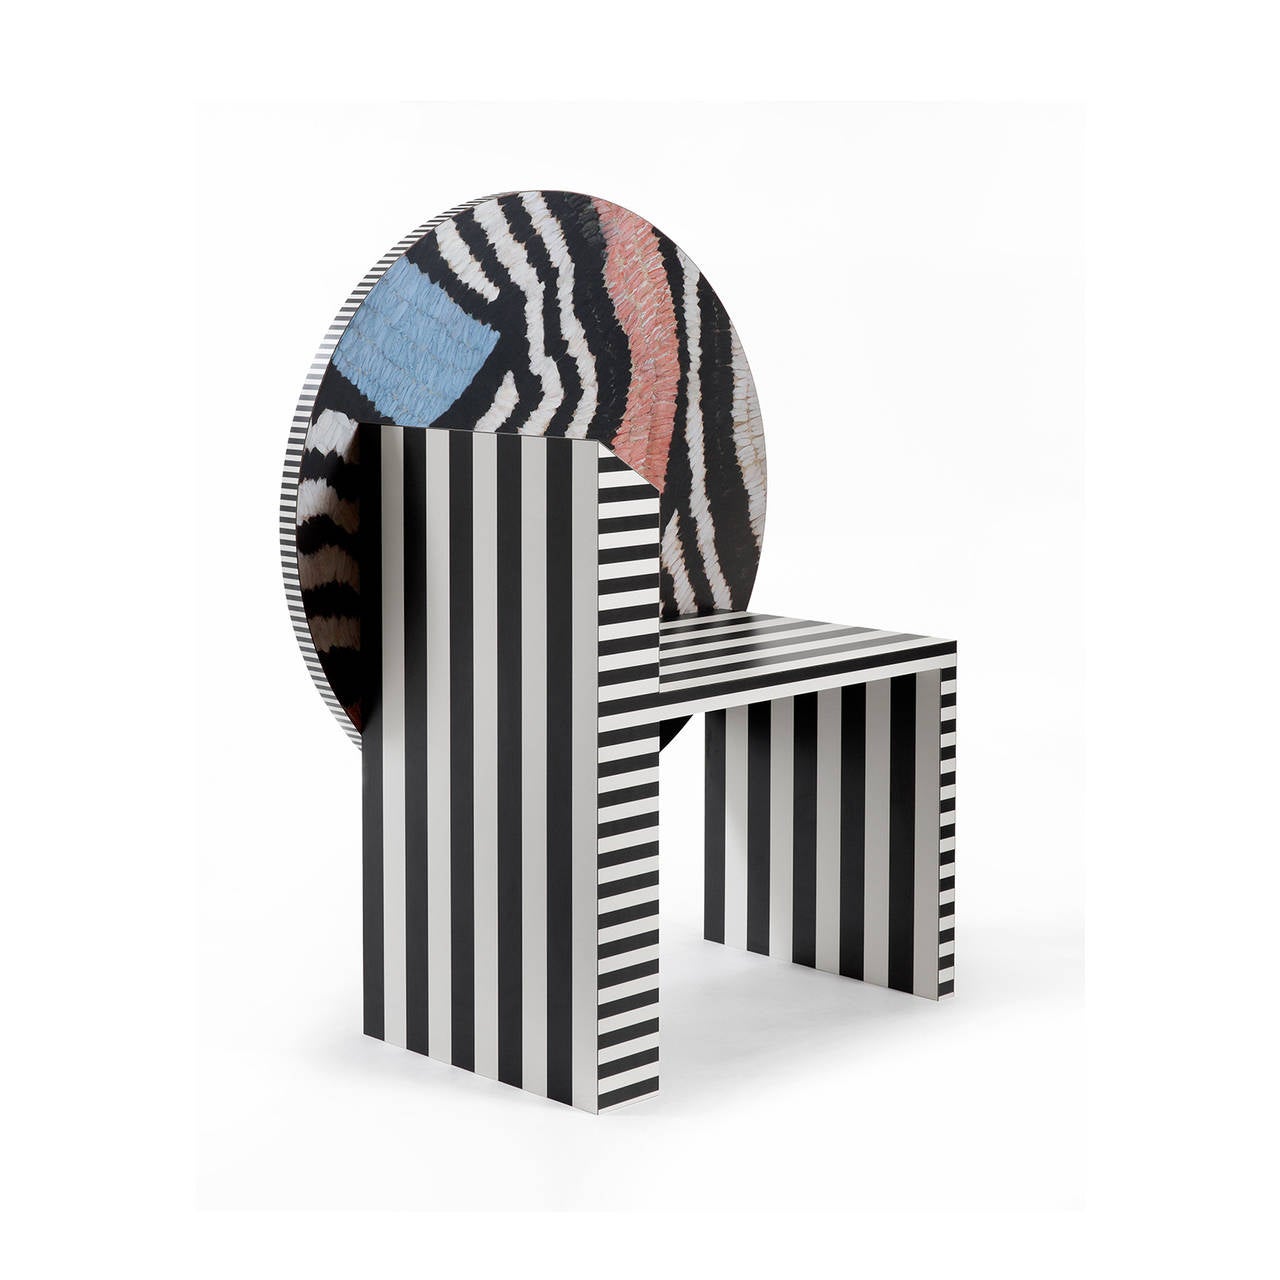 American Memphis Inspired Chair | Neo Laminati Collection